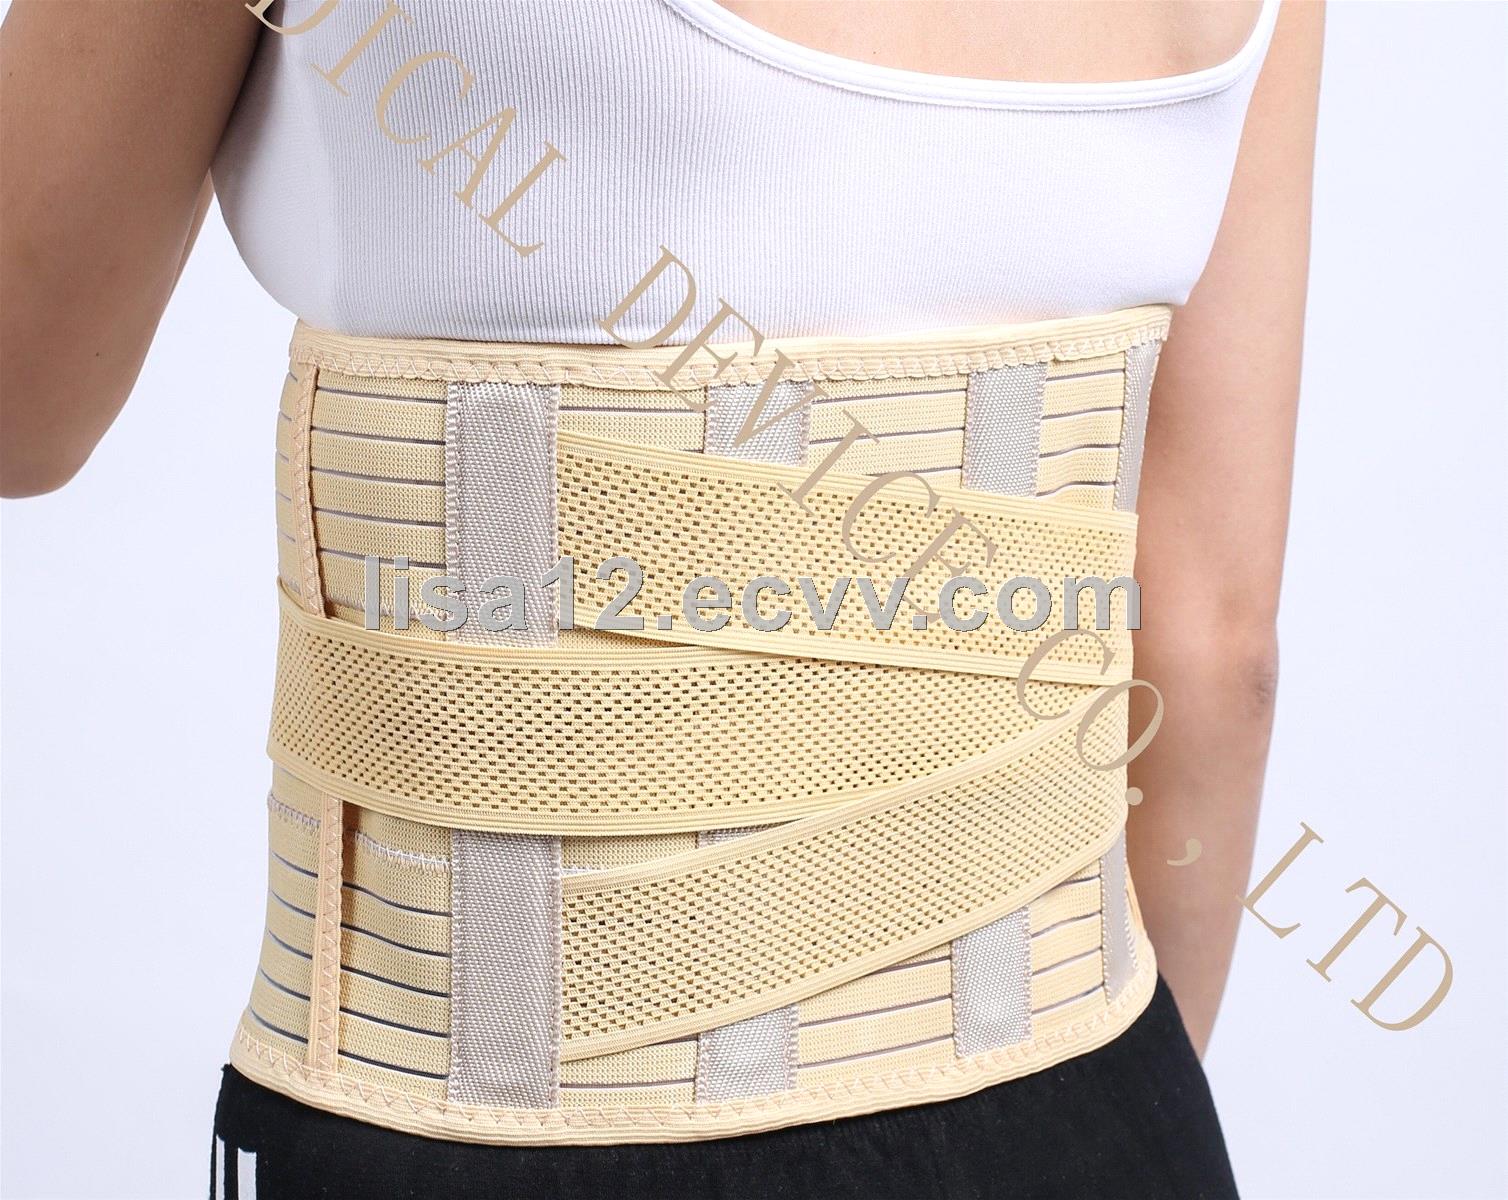 Adjustable wide back pain relieve back support belt to protect the waist